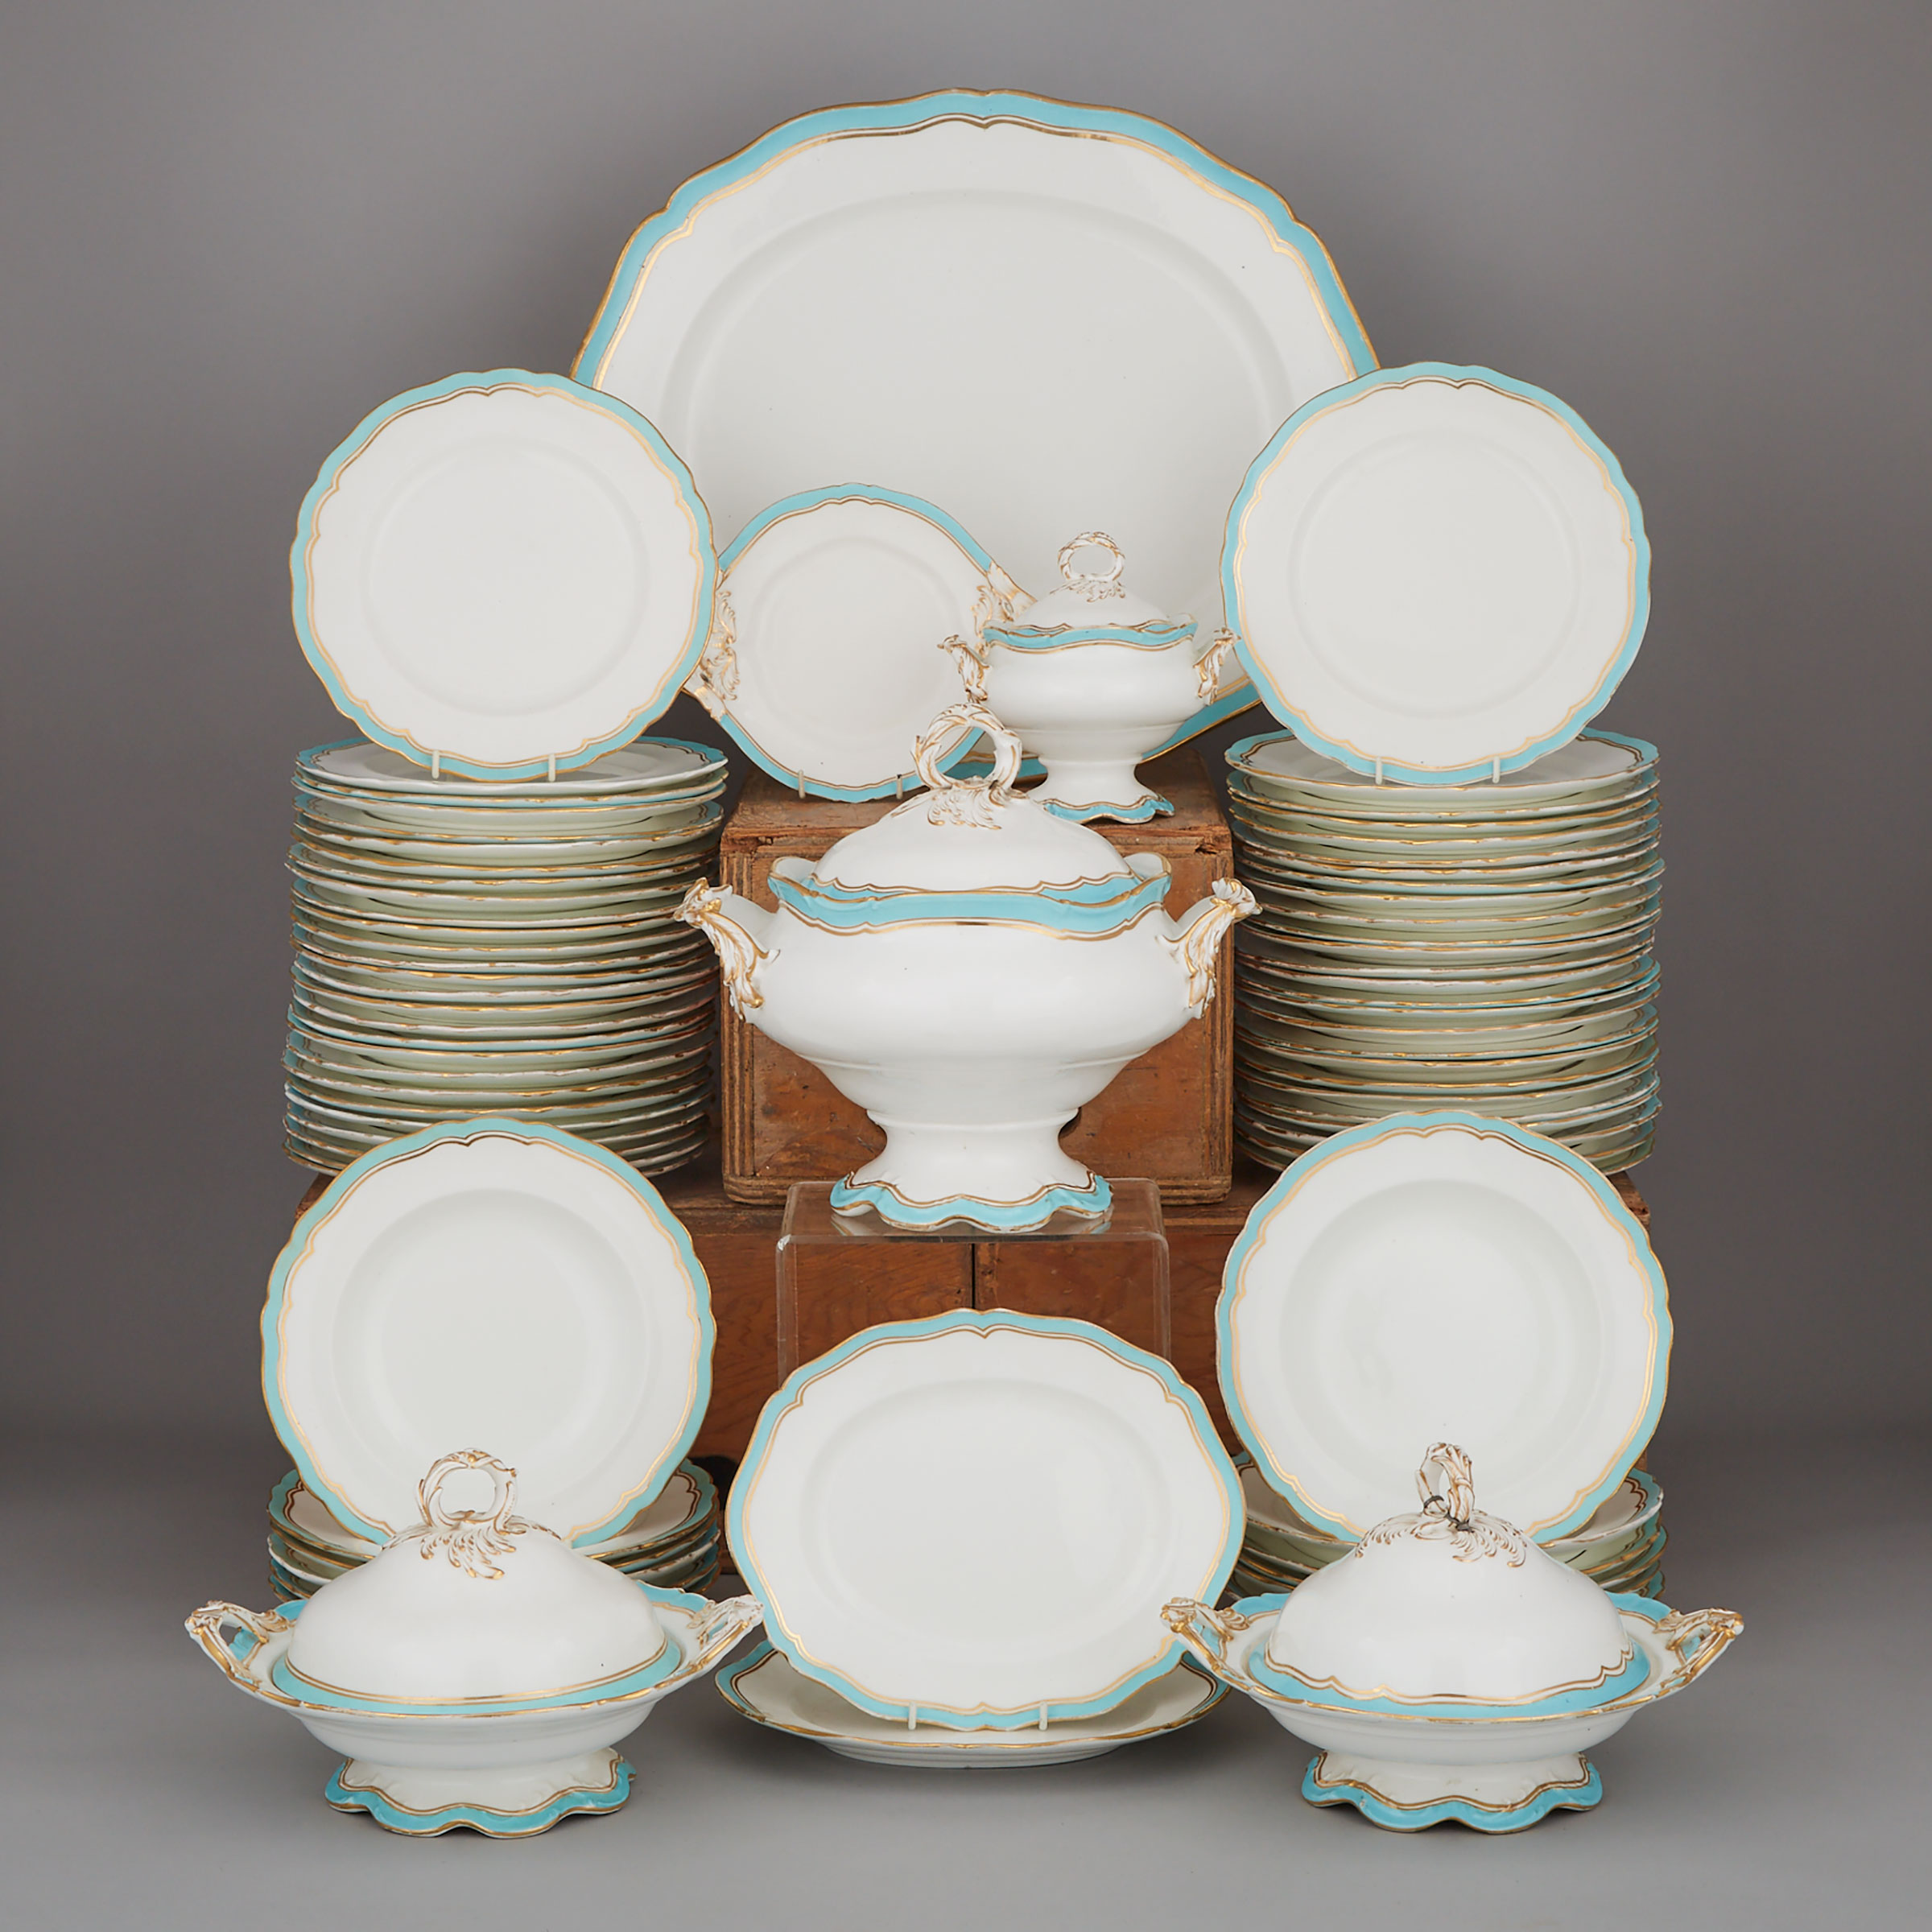 English Porcelain Light Blue and Gilt Decorated Dinner Service, mid-19th century